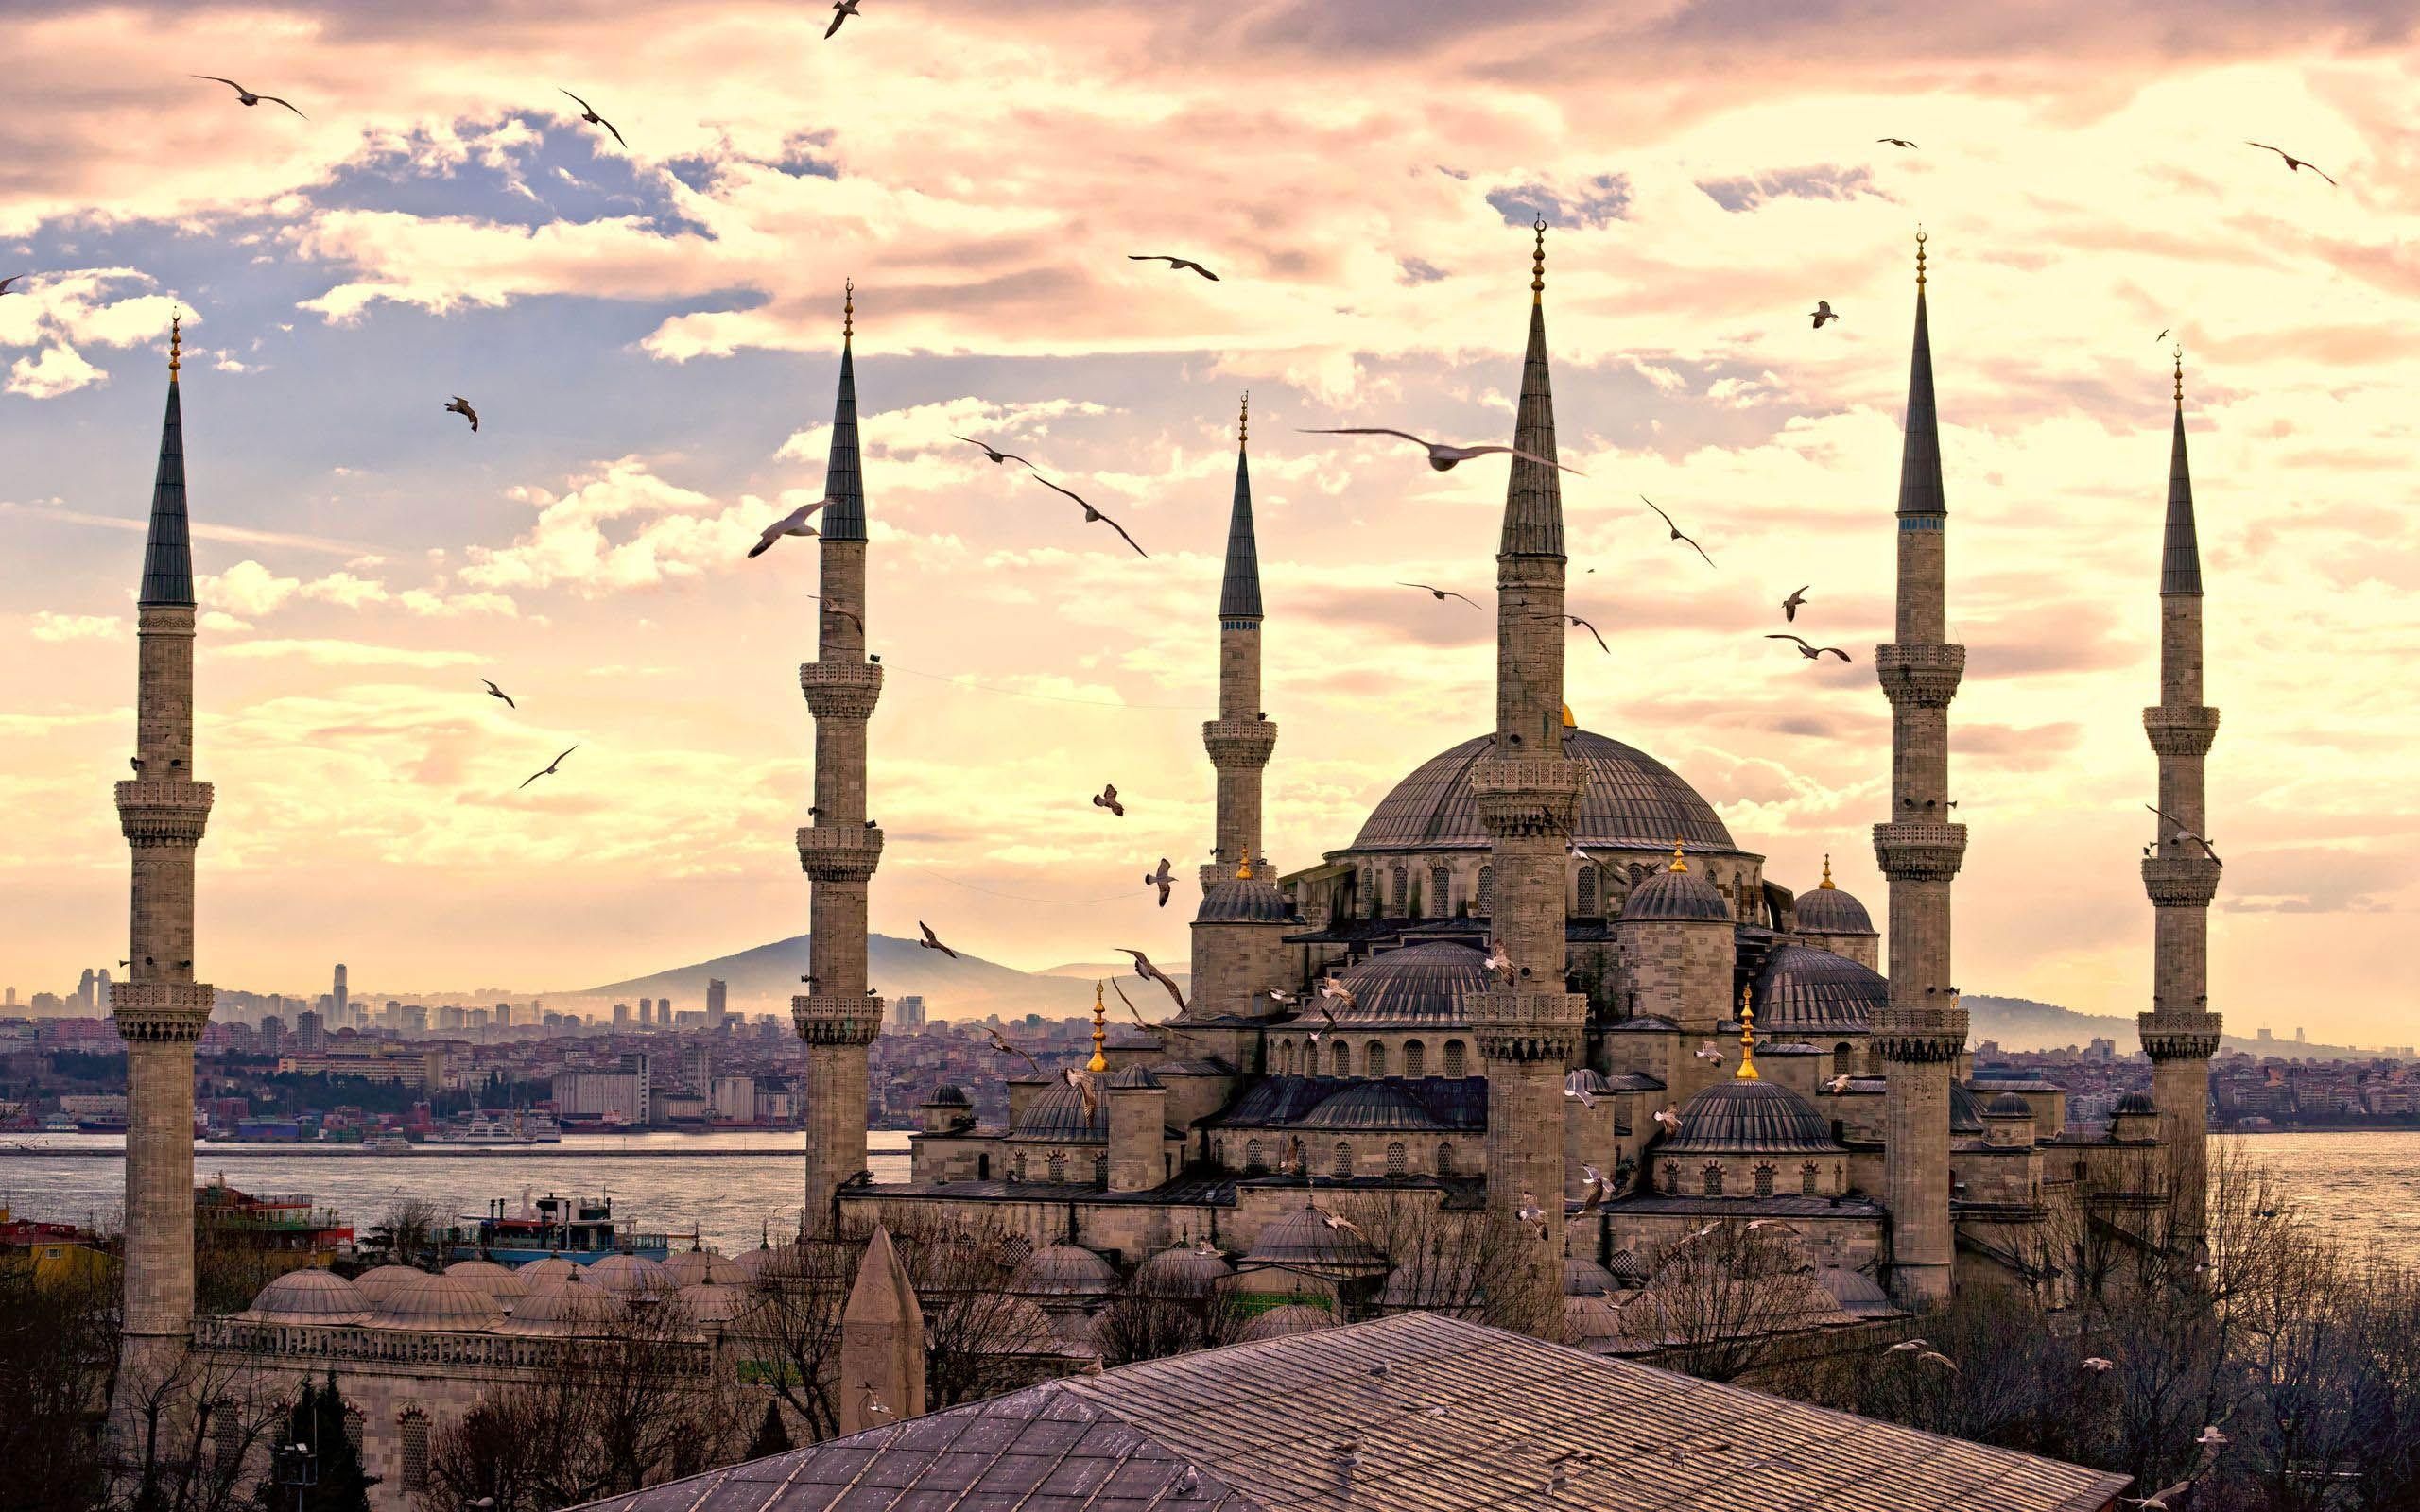 HD Turkish Wallpaper and Photo. View FHDQ Wallpaper